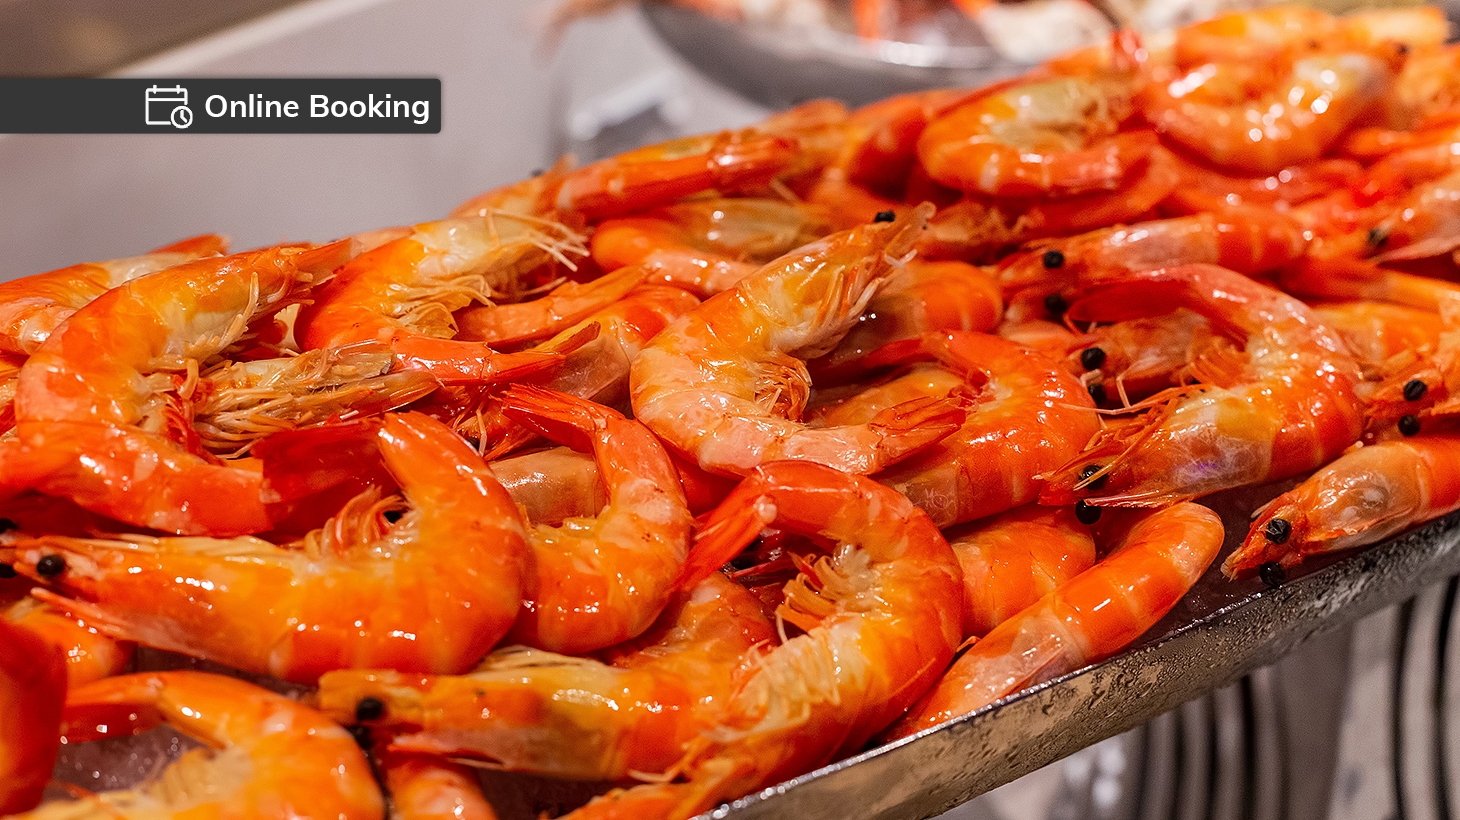 All-You-Can-Eat Seafood Buffet with Wine in Warwick Farm | Scoopon